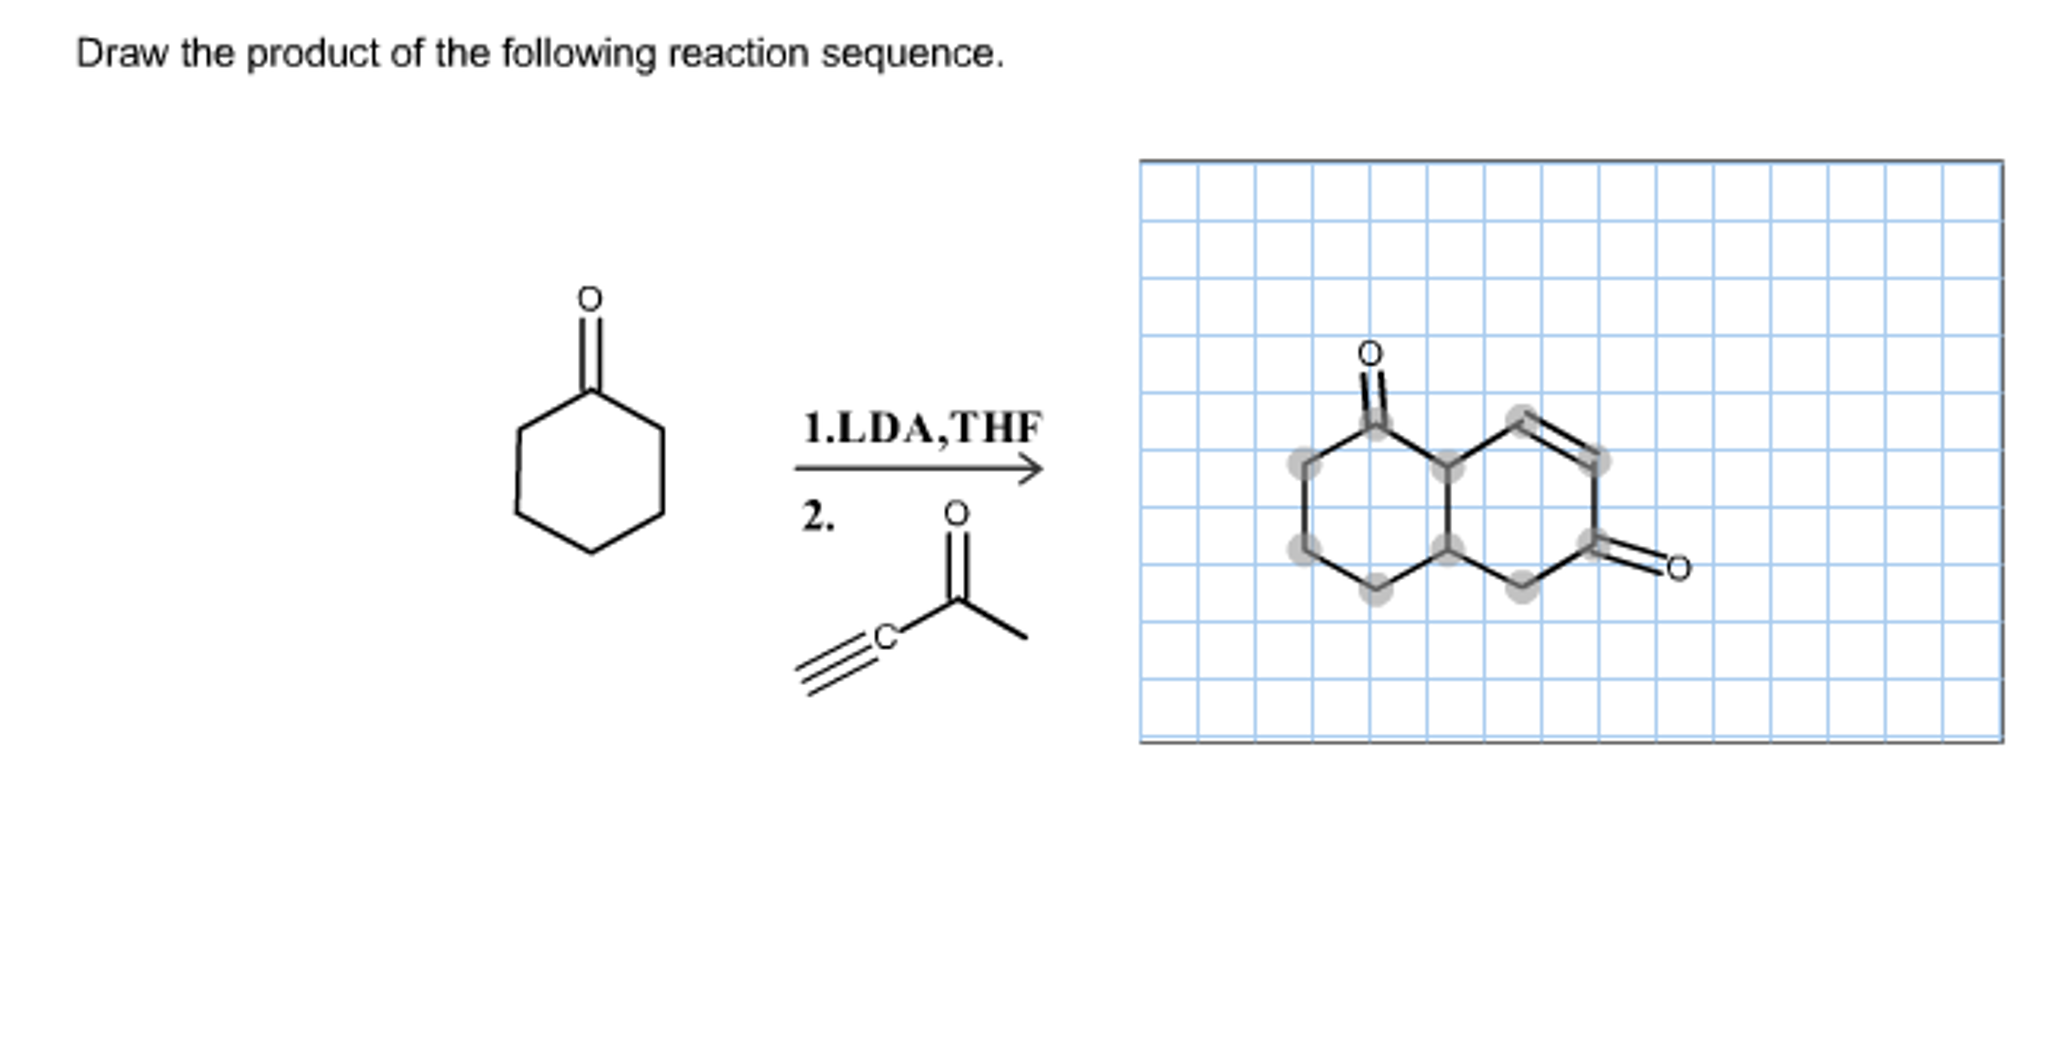 draw the product of the given reaction sequence. partbegingo